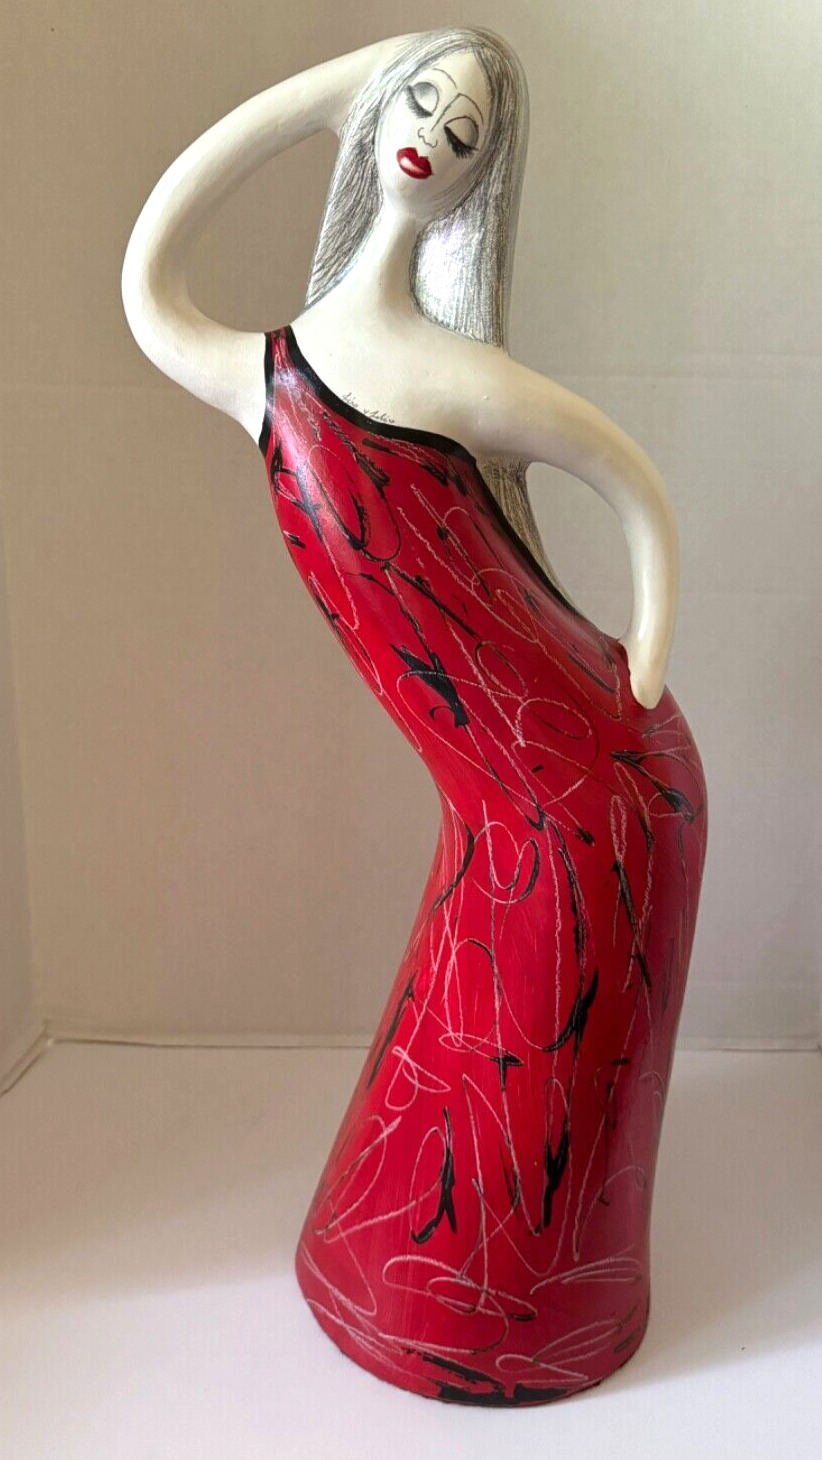 Signed Ceramic Hand Made / Painted Woman Sculpture 25 inch Flamenco Dancer  OOAK